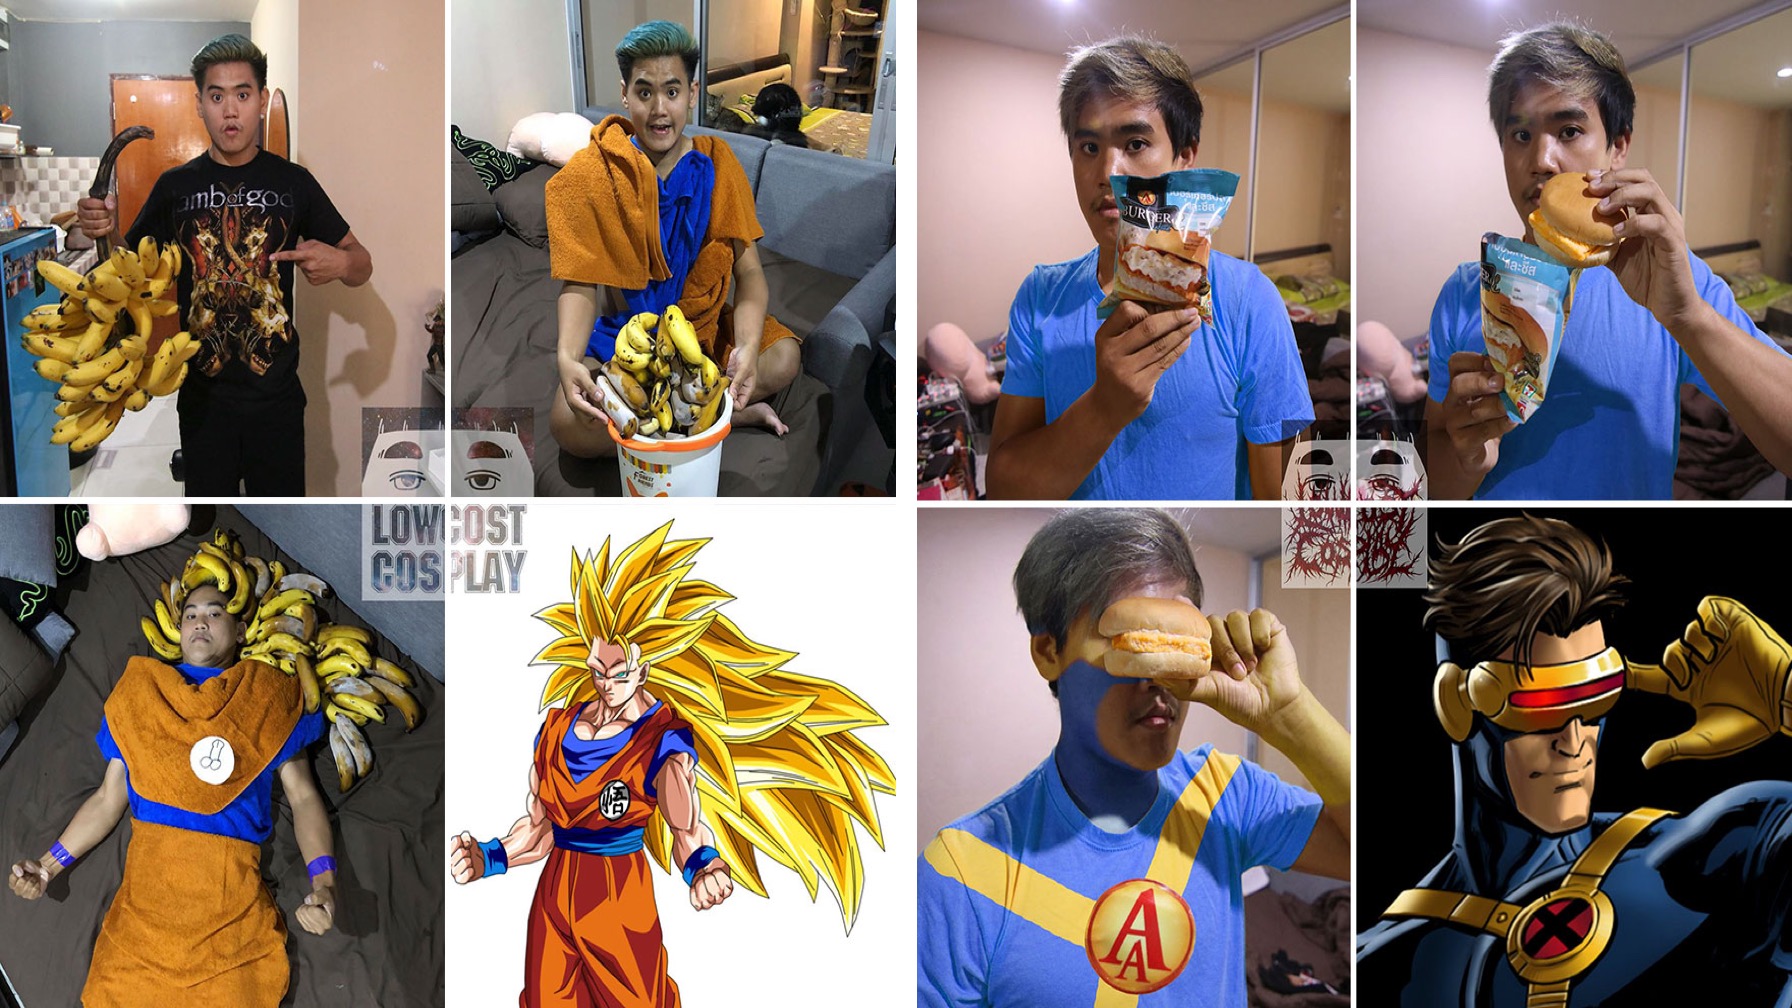 Low Cost Cosplay Guy Makes The World A Better Place The Dad.